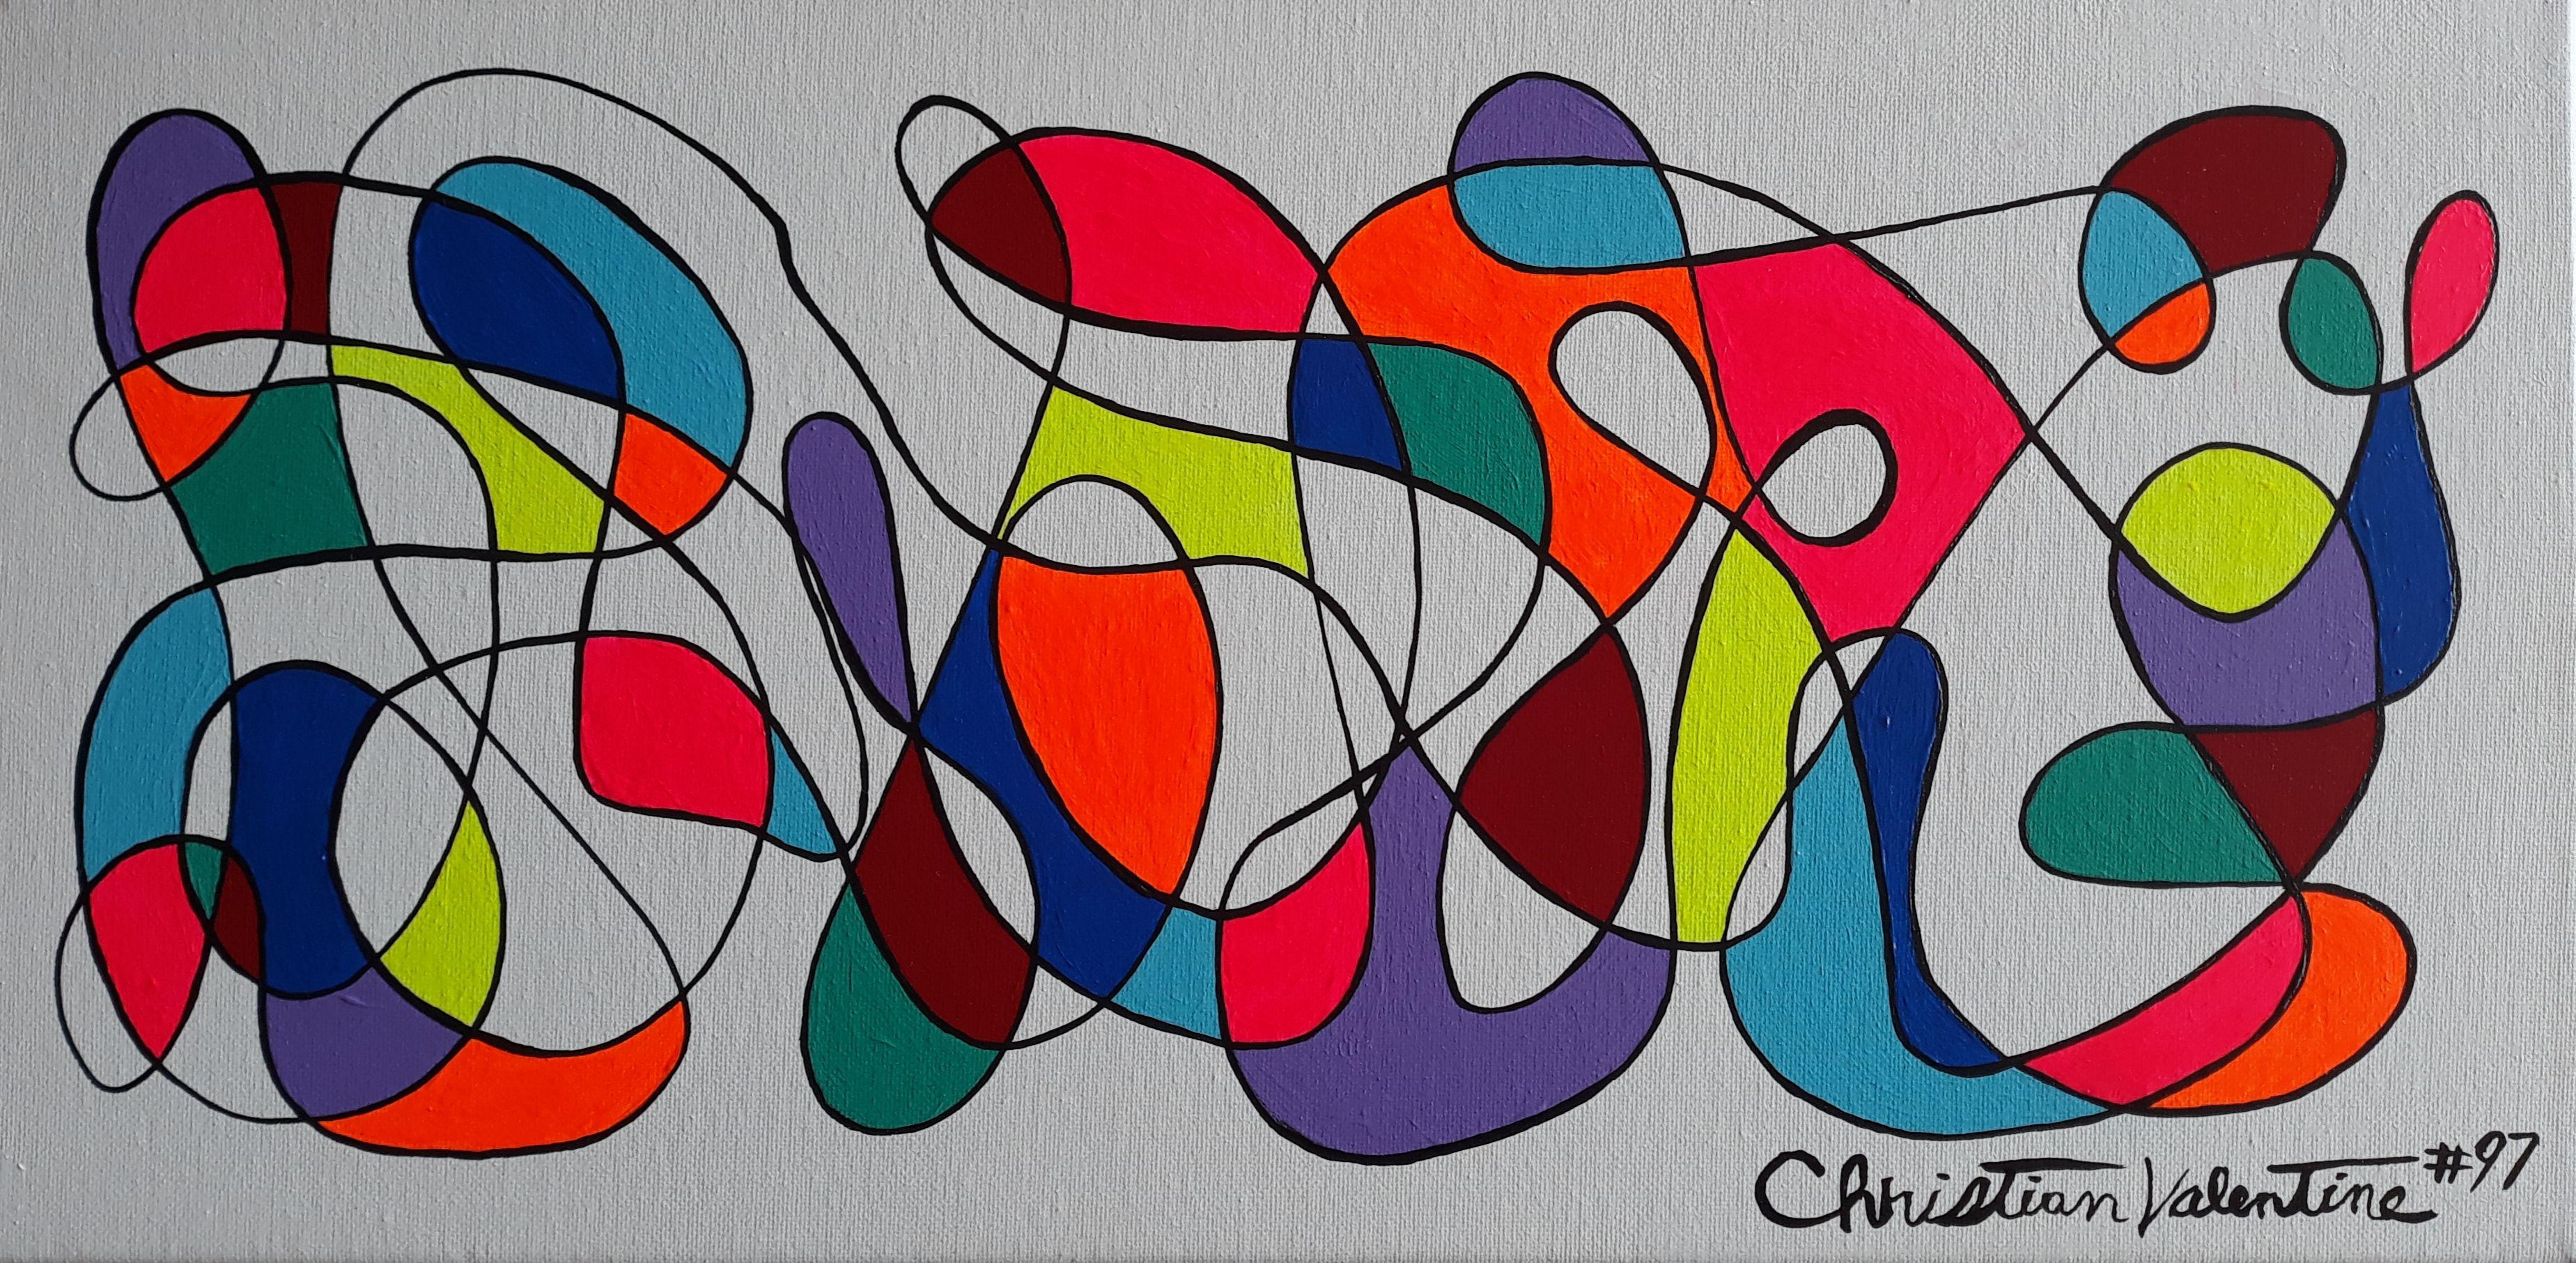 Christian Valentine Abstract Painting - Egg hunt, Painting, Acrylic on Canvas